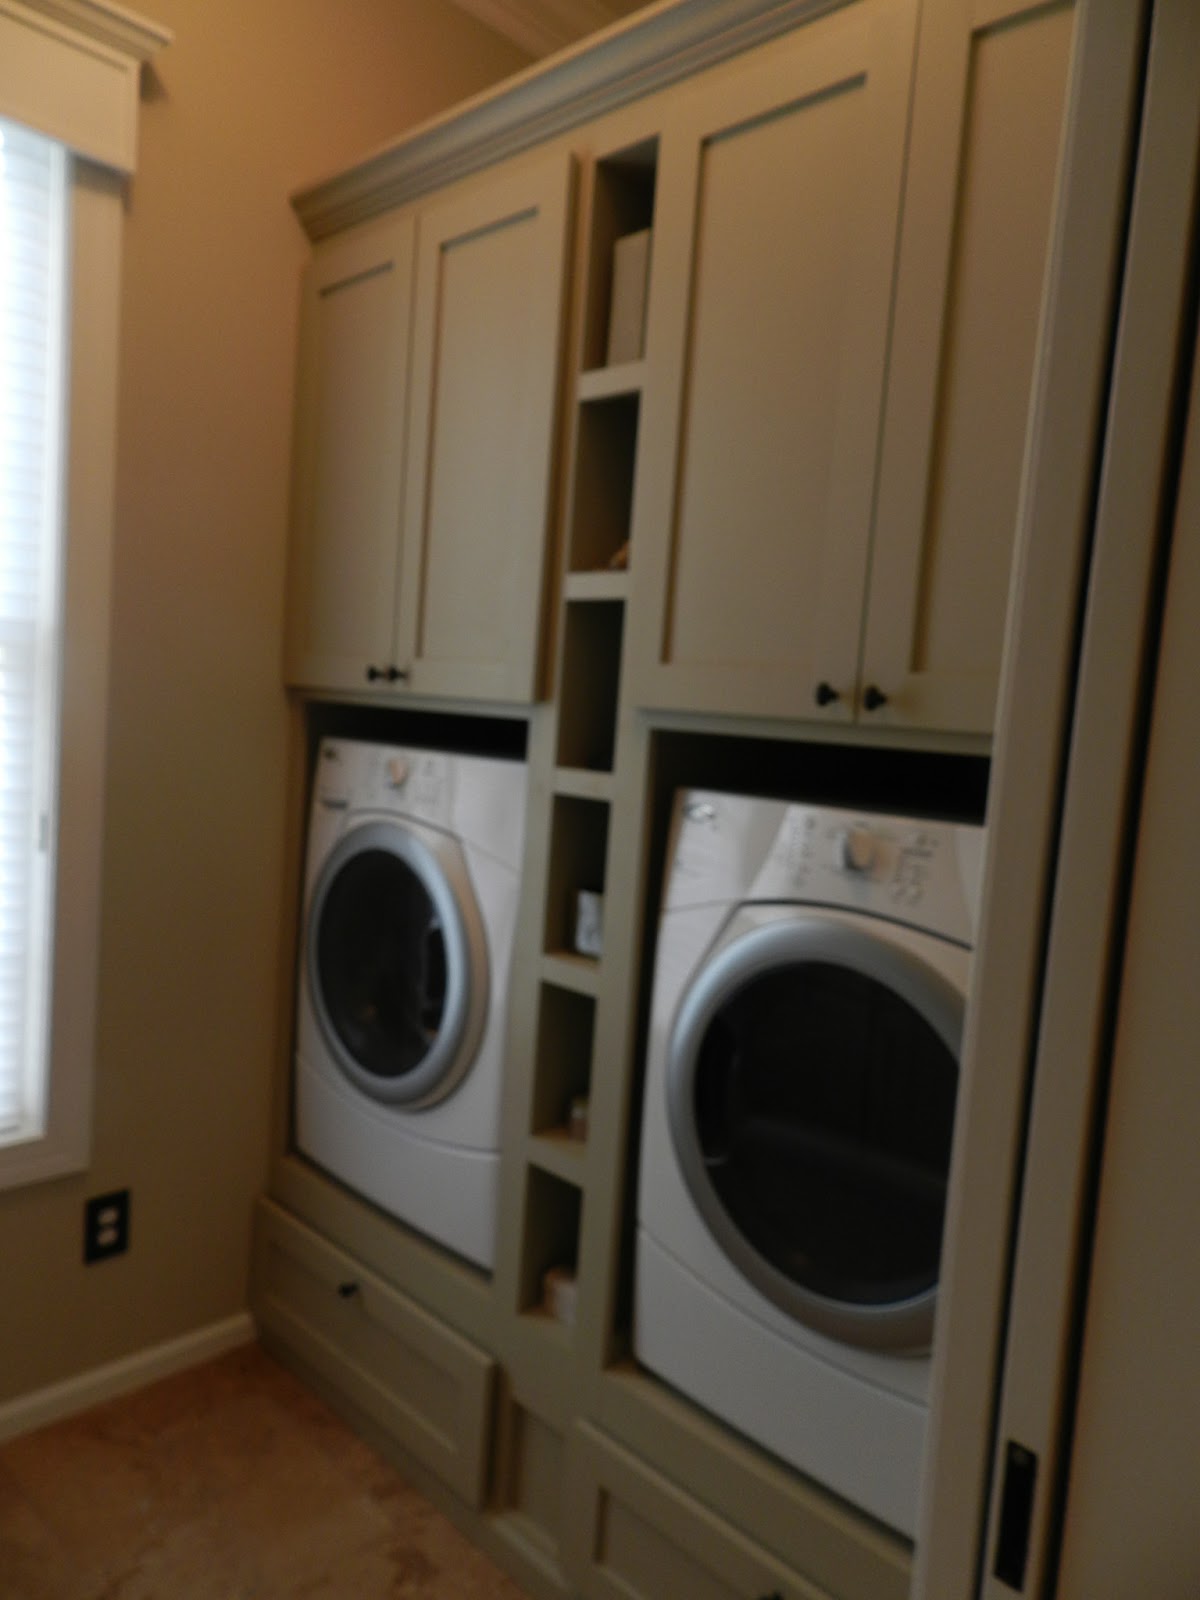 Decor You Adore: Spectacular Before & After Laundry Room